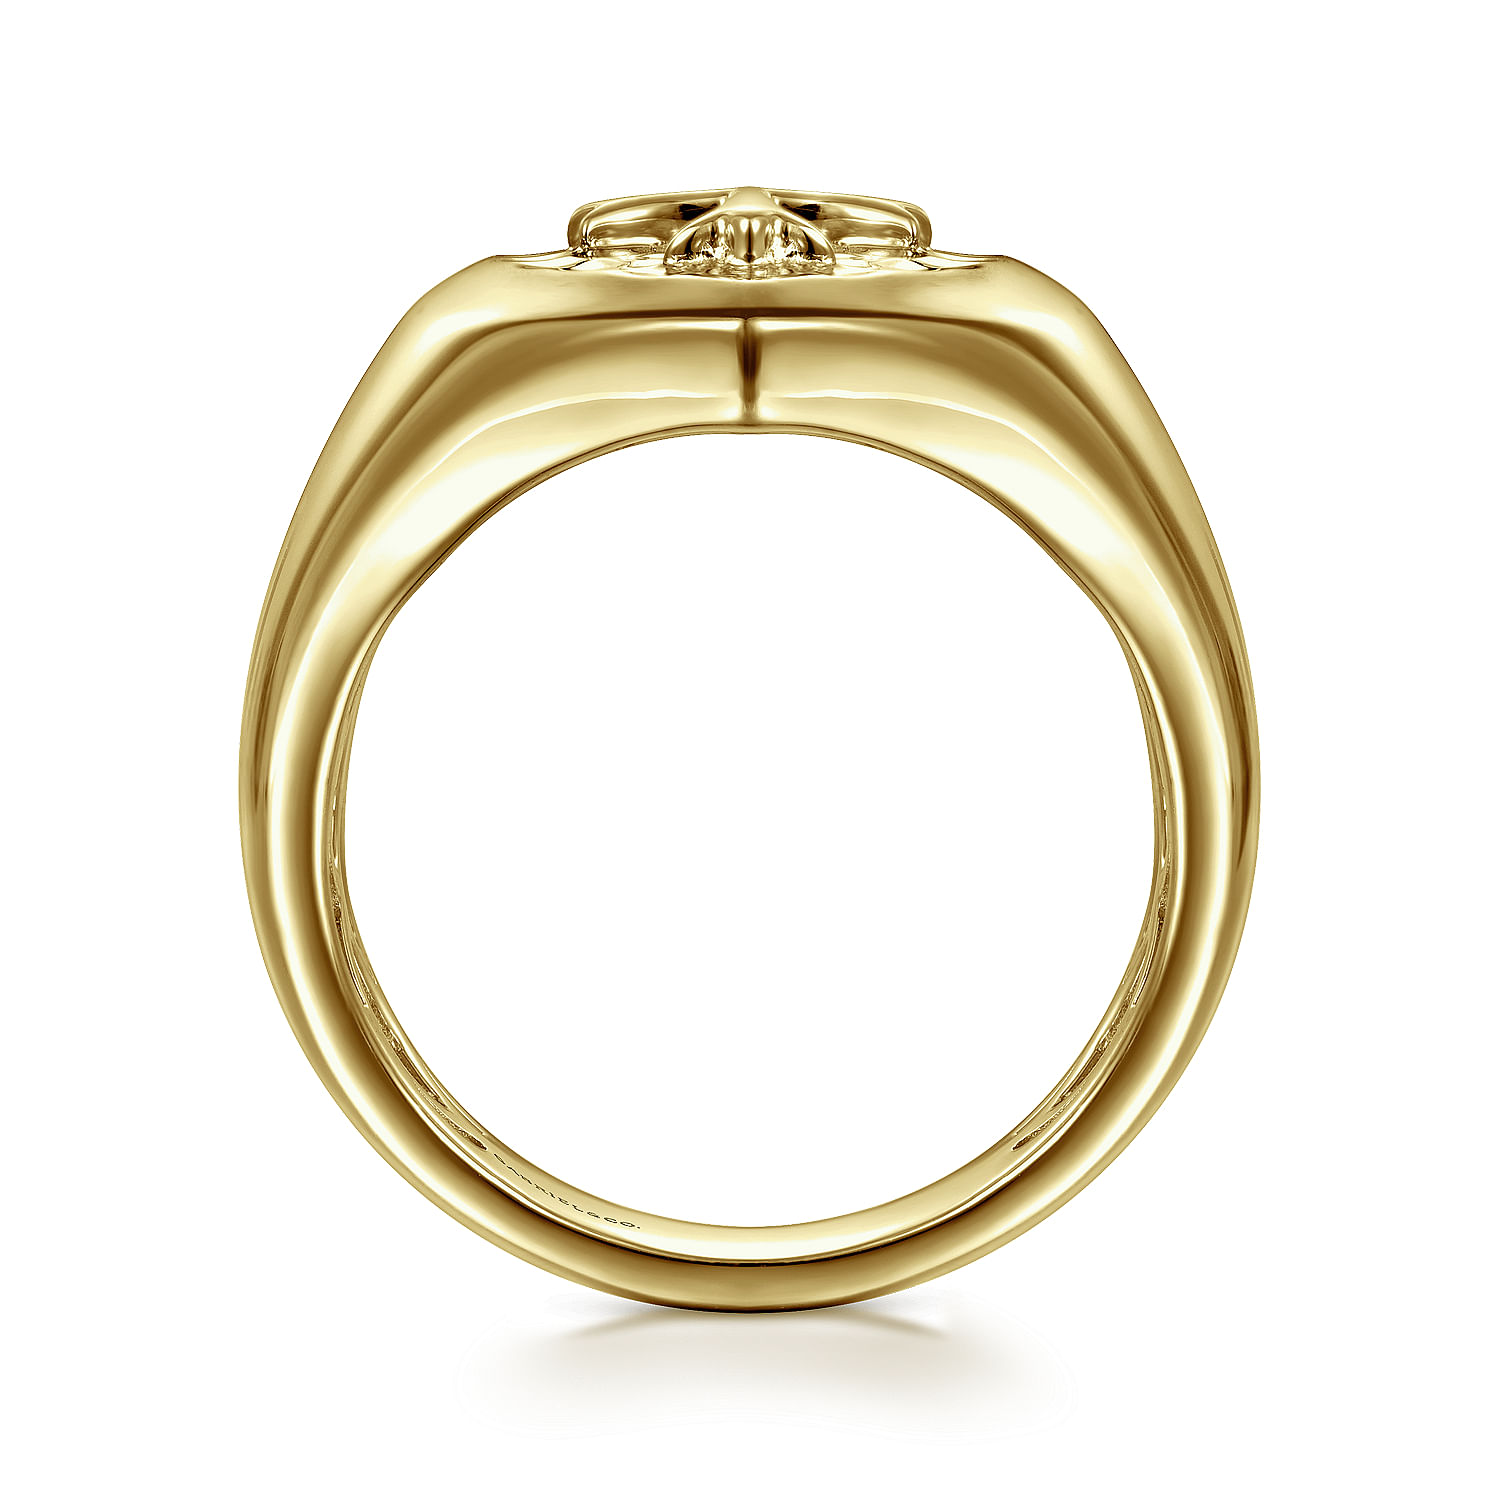 Wide 14K Yellow Gold Cross Signet Ring in High Polished Finish